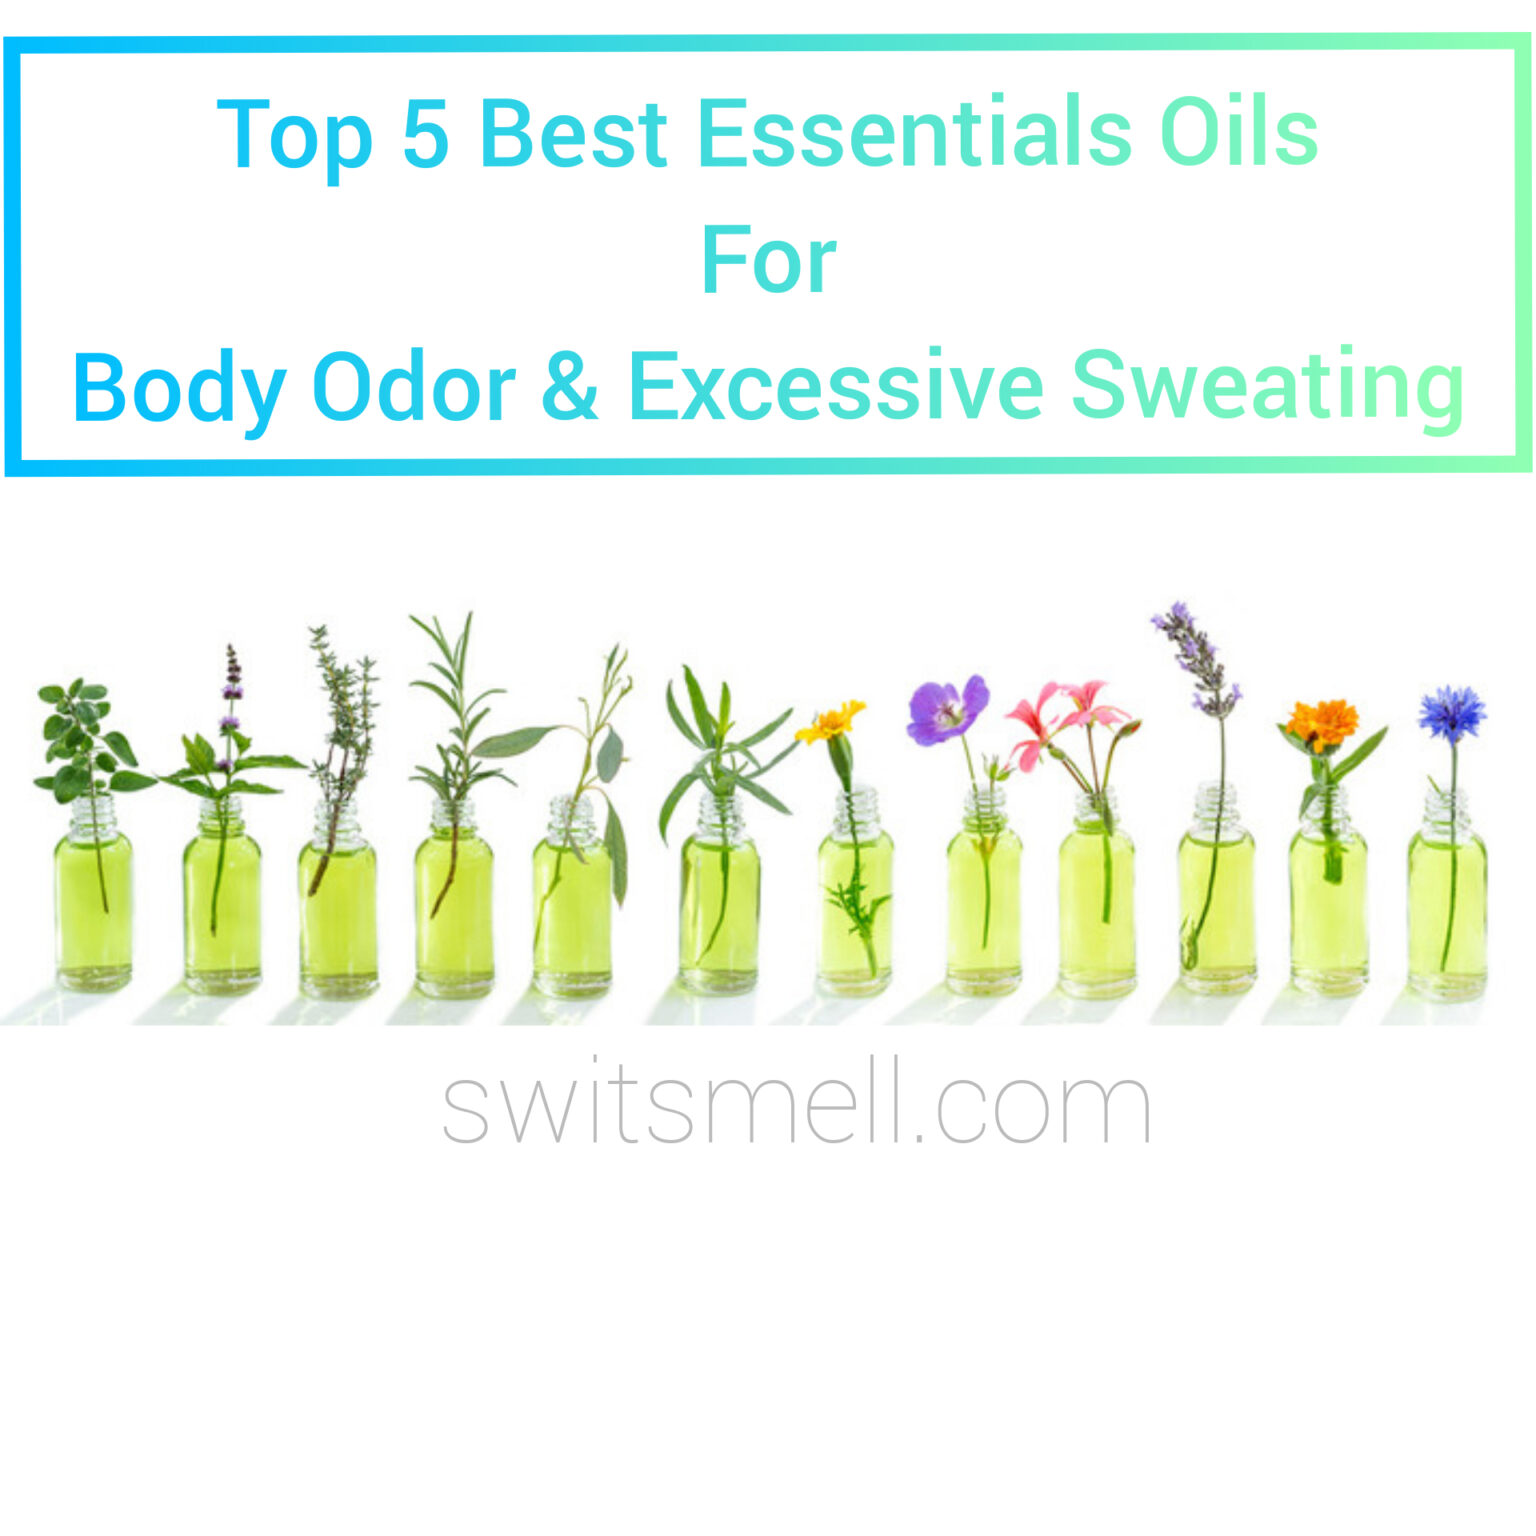 Top 5 Essential Oils For Body Odor And Excessive Sweating Switsmell 